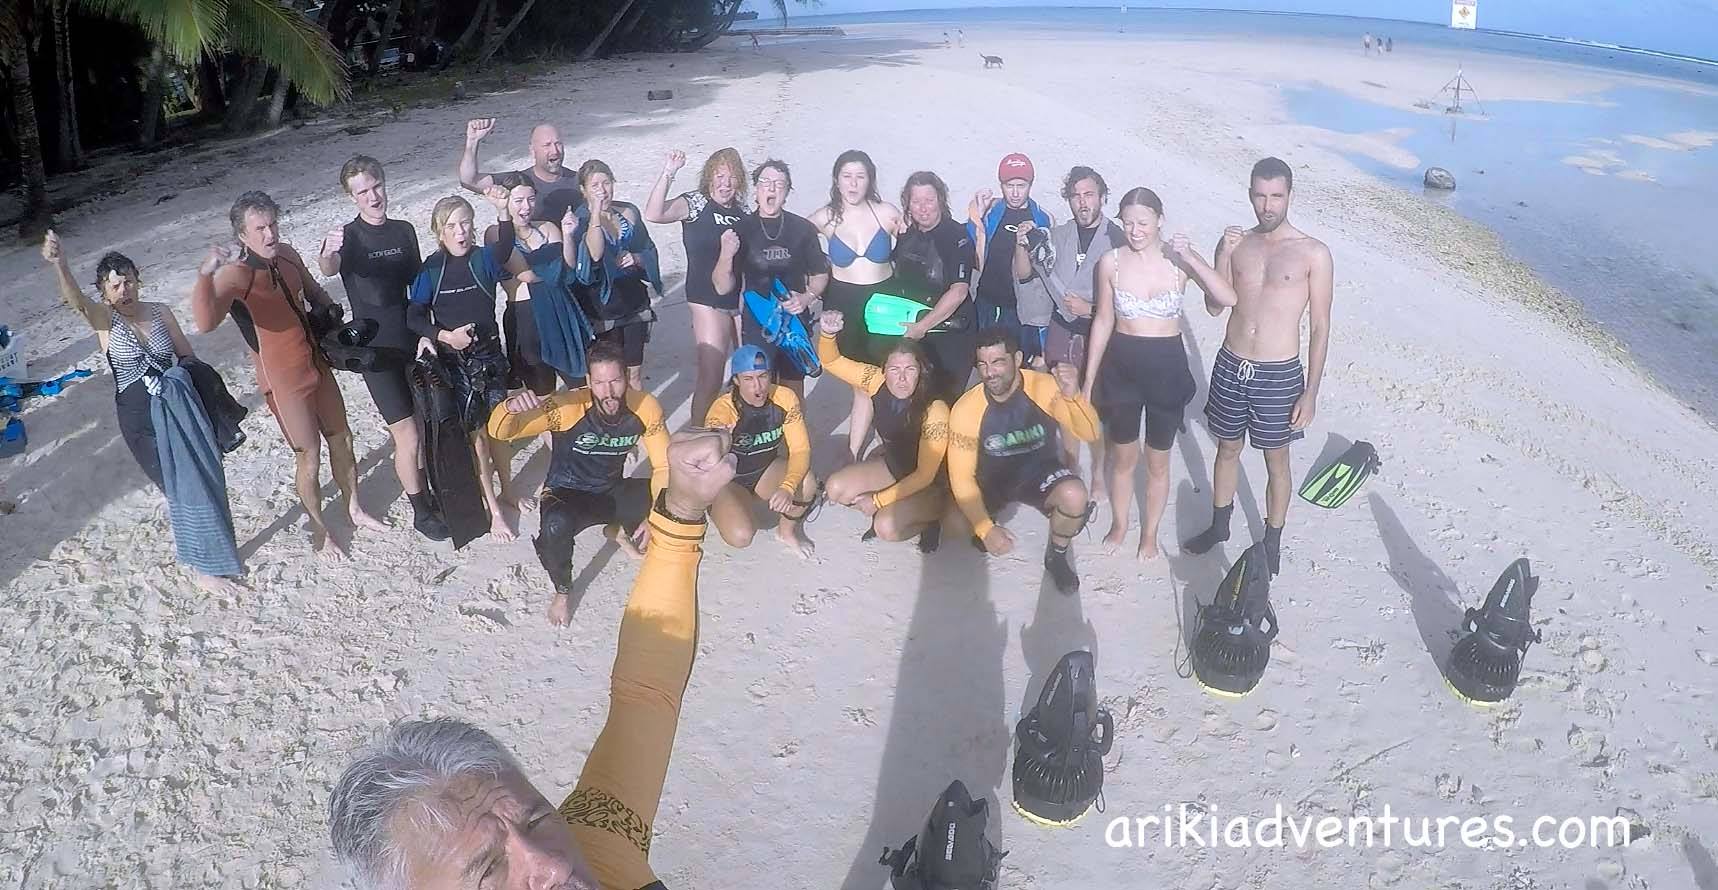 Turtle safari group picture - Weds 17th July 2019.jpg